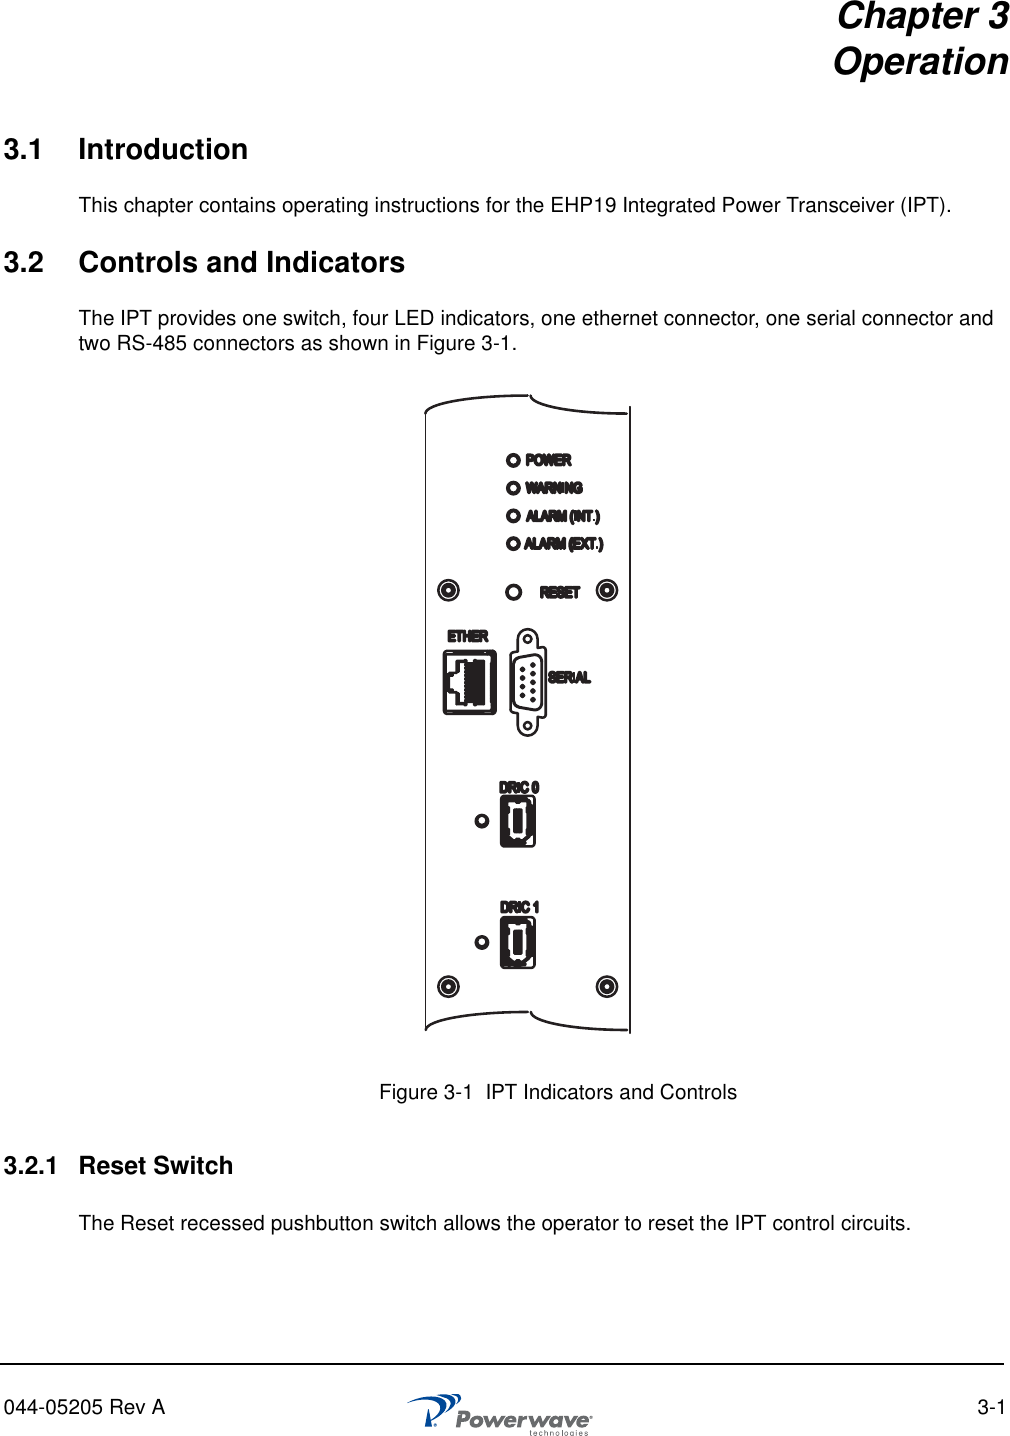 044-05205 Rev A 3-1Chapter 3Operation3.1 IntroductionThis chapter contains operating instructions for the EHP19 Integrated Power Transceiver (IPT).3.2 Controls and IndicatorsThe IPT provides one switch, four LED indicators, one ethernet connector, one serial connector and two RS-485 connectors as shown in Figure 3-1.3.2.1 Reset SwitchThe Reset recessed pushbutton switch allows the operator to reset the IPT control circuits.Figure 3-1  IPT Indicators and Controls